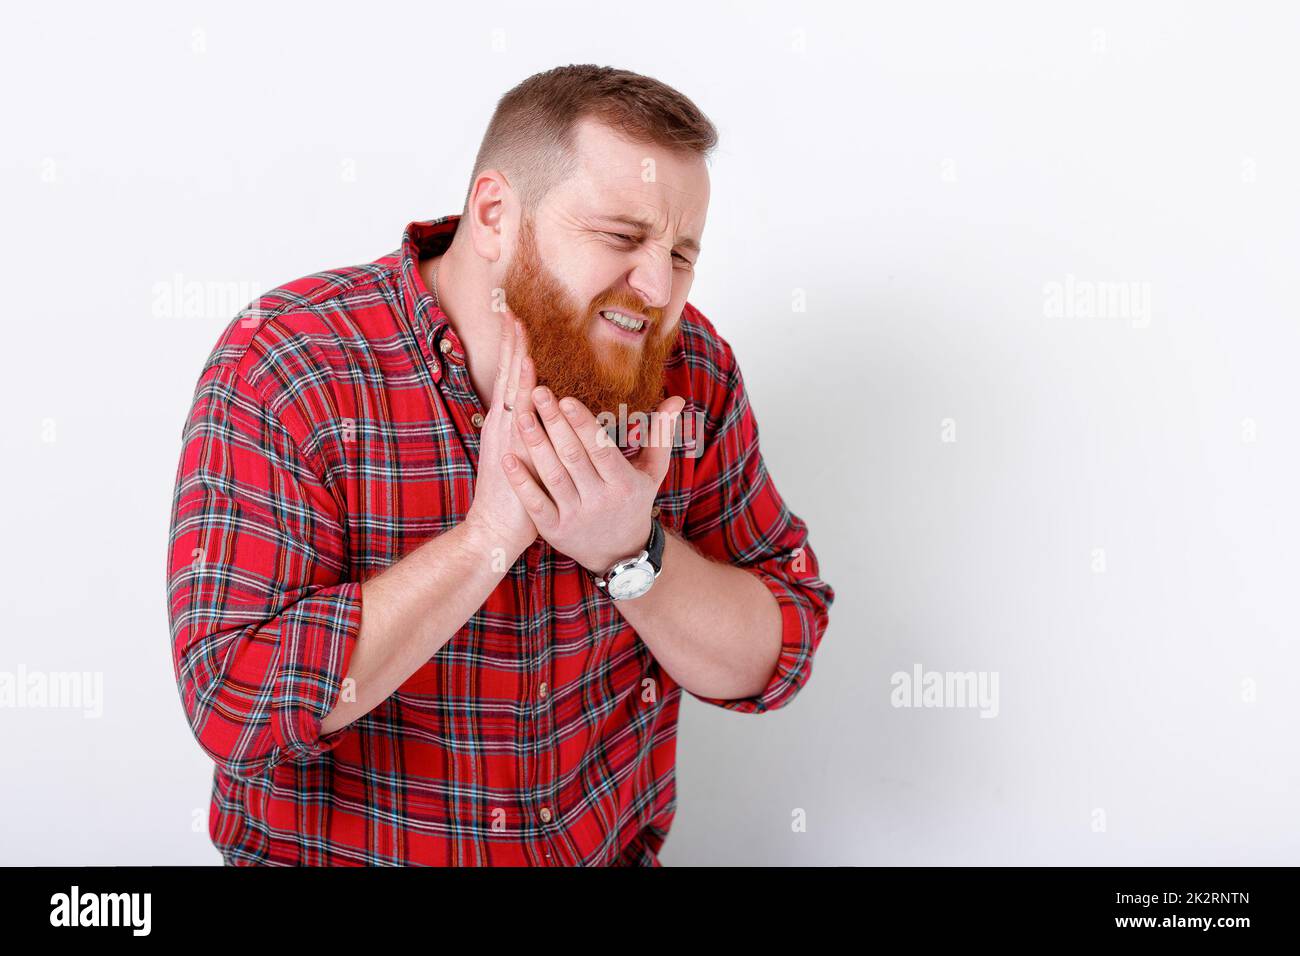 Suffering with toothache Stock Photo